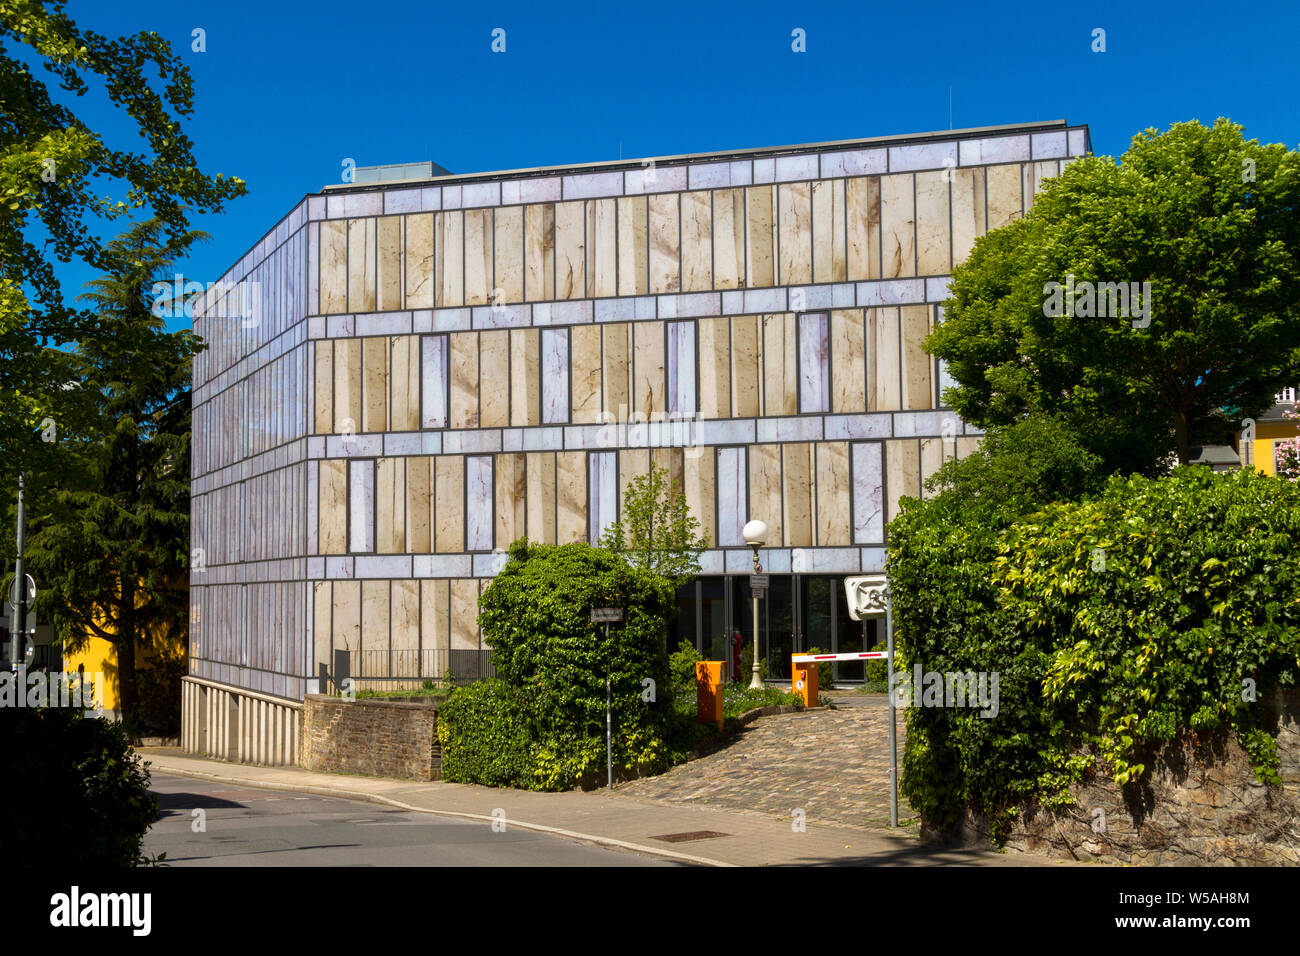 Folkwang Library at the Folkwang University in the district Werden, Essen, Ruhrgebiet, Germany.  Folkwang Bibliothek an der Folkwang Universitaet im S Stock Photo